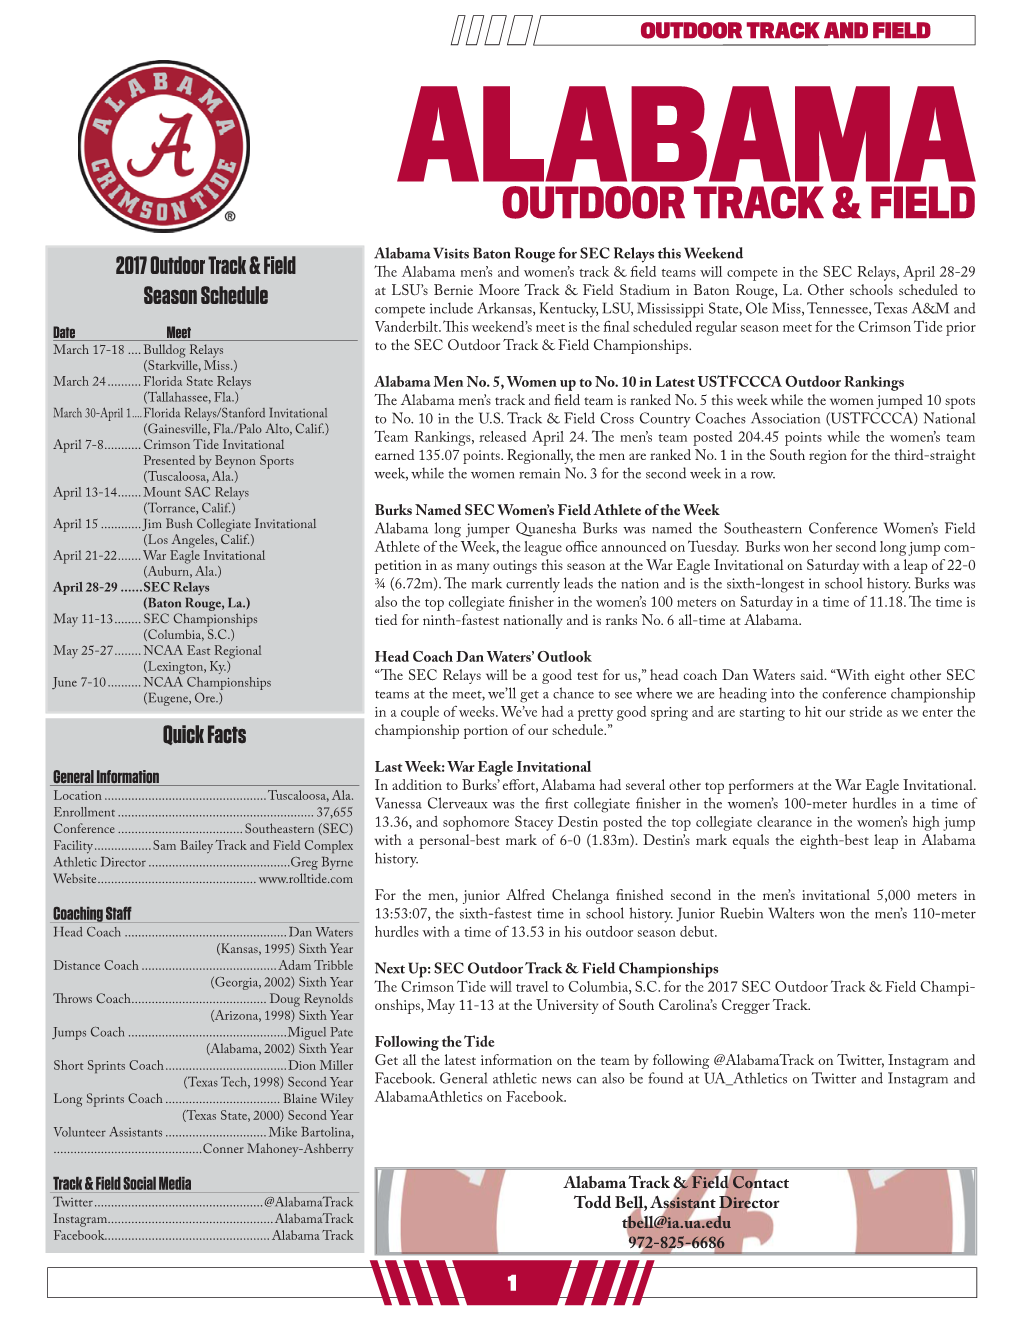 Outdoor Track & Field Notes